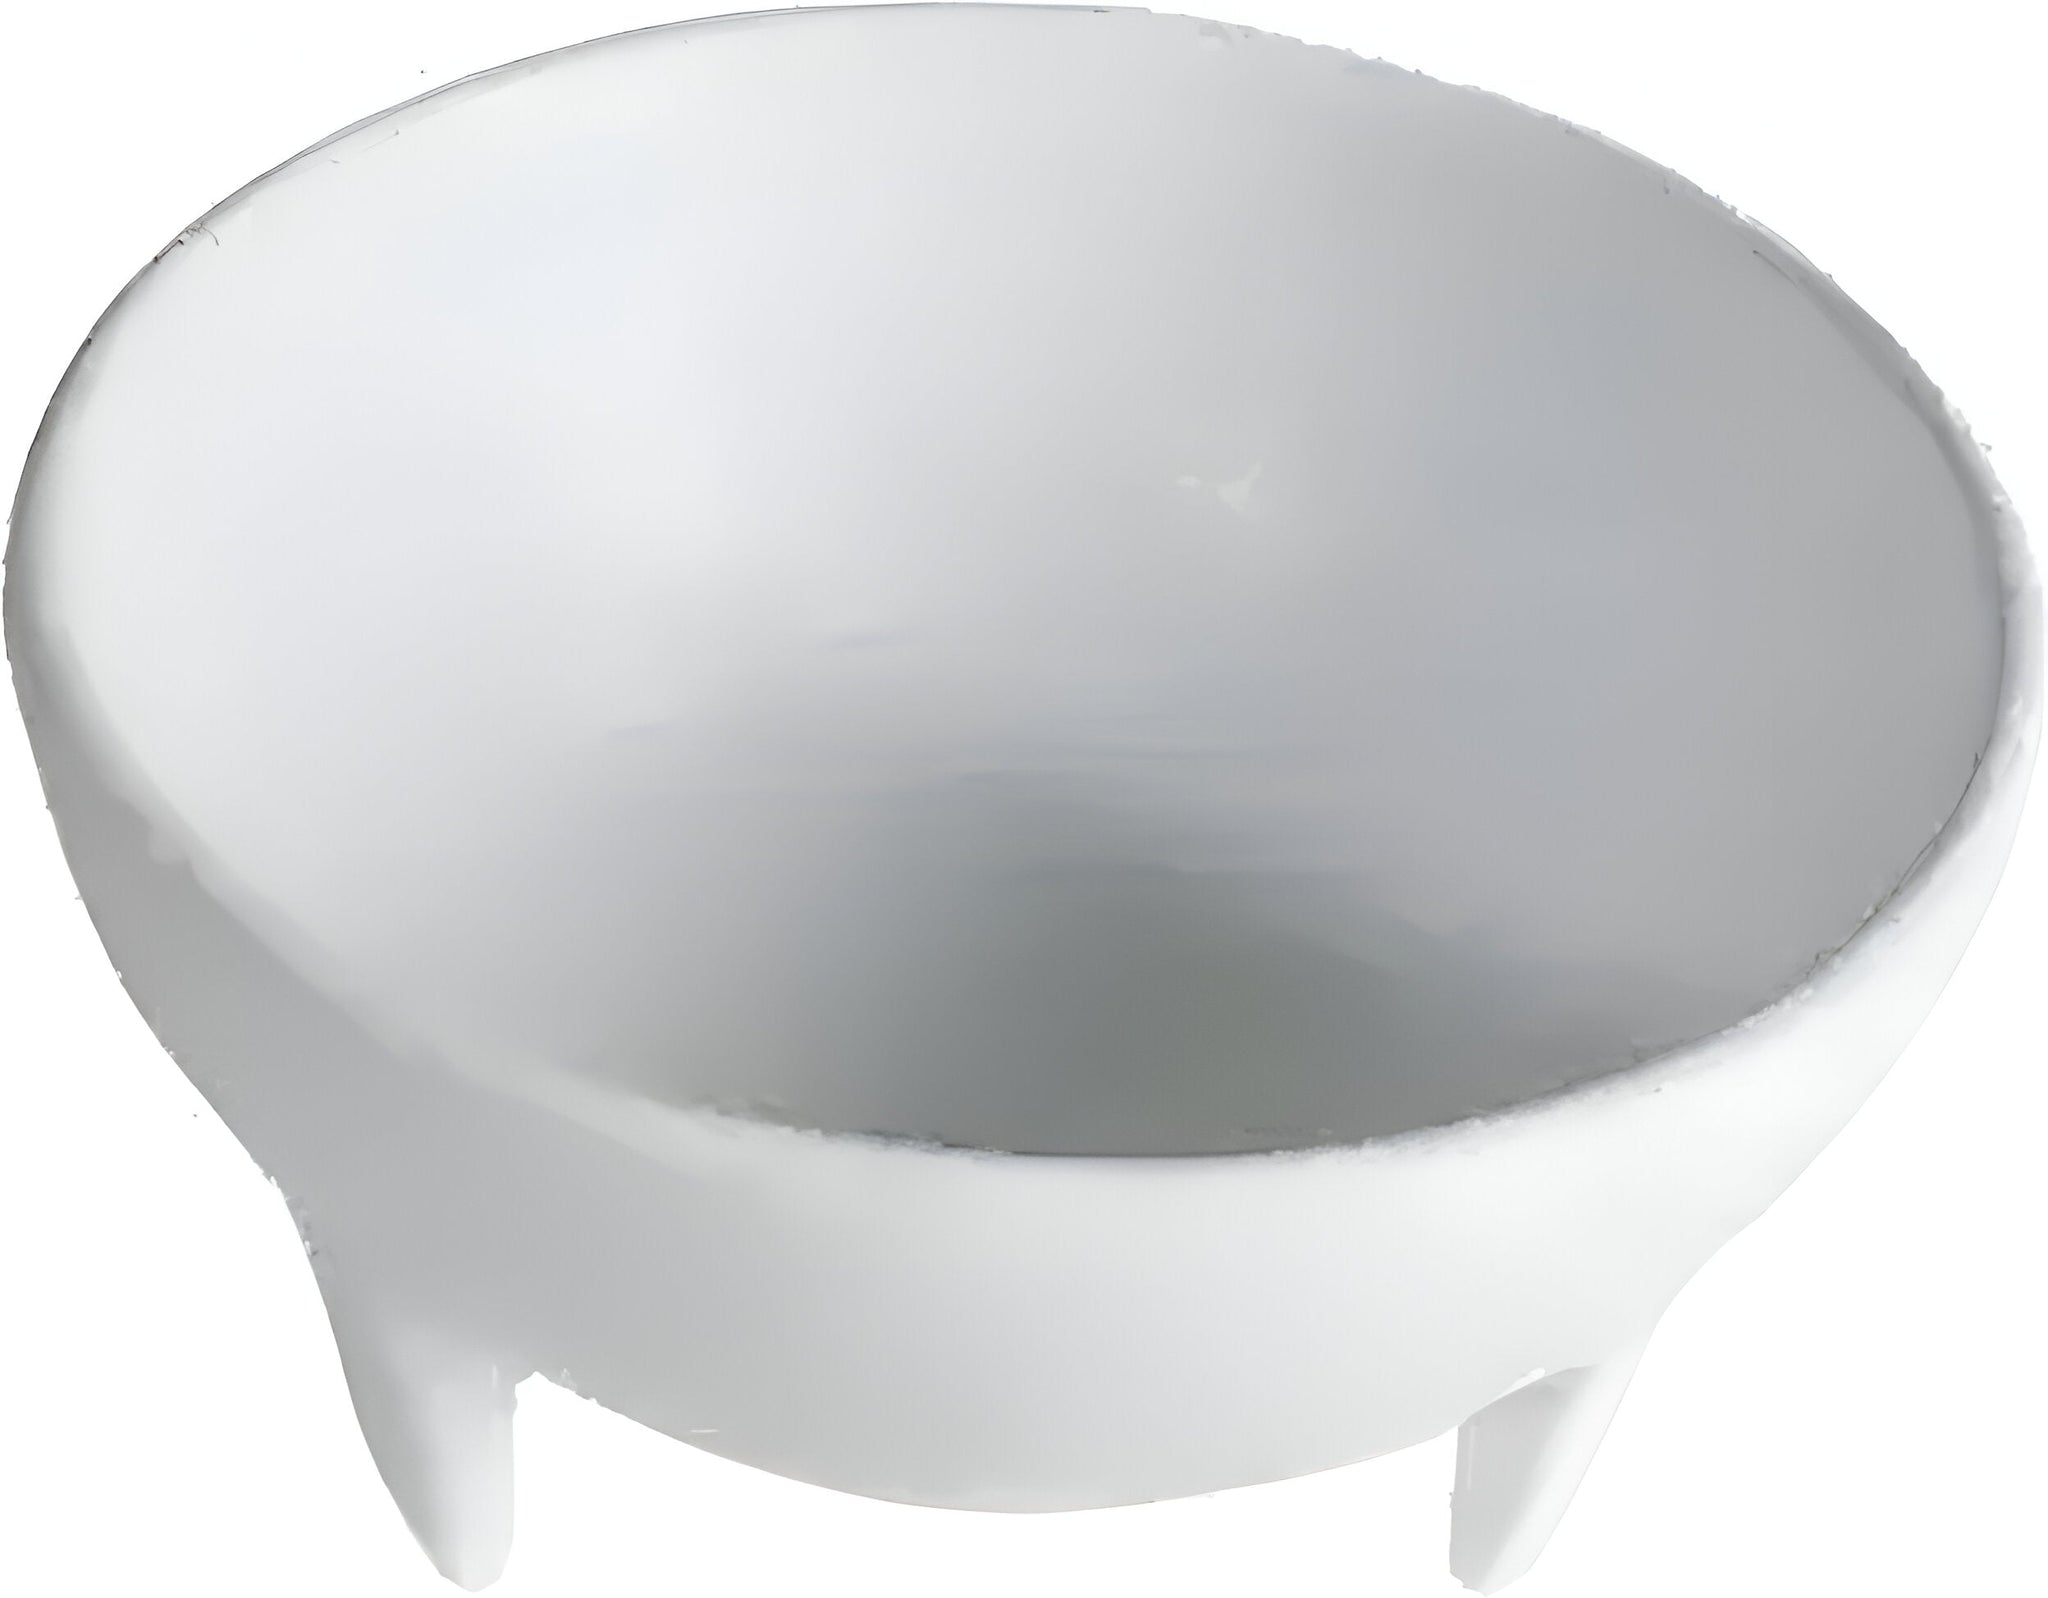 Bugambilia - Classic Large White Round Custom Molcajete Without Spoon With Elegantly Textured - MJSS4WW